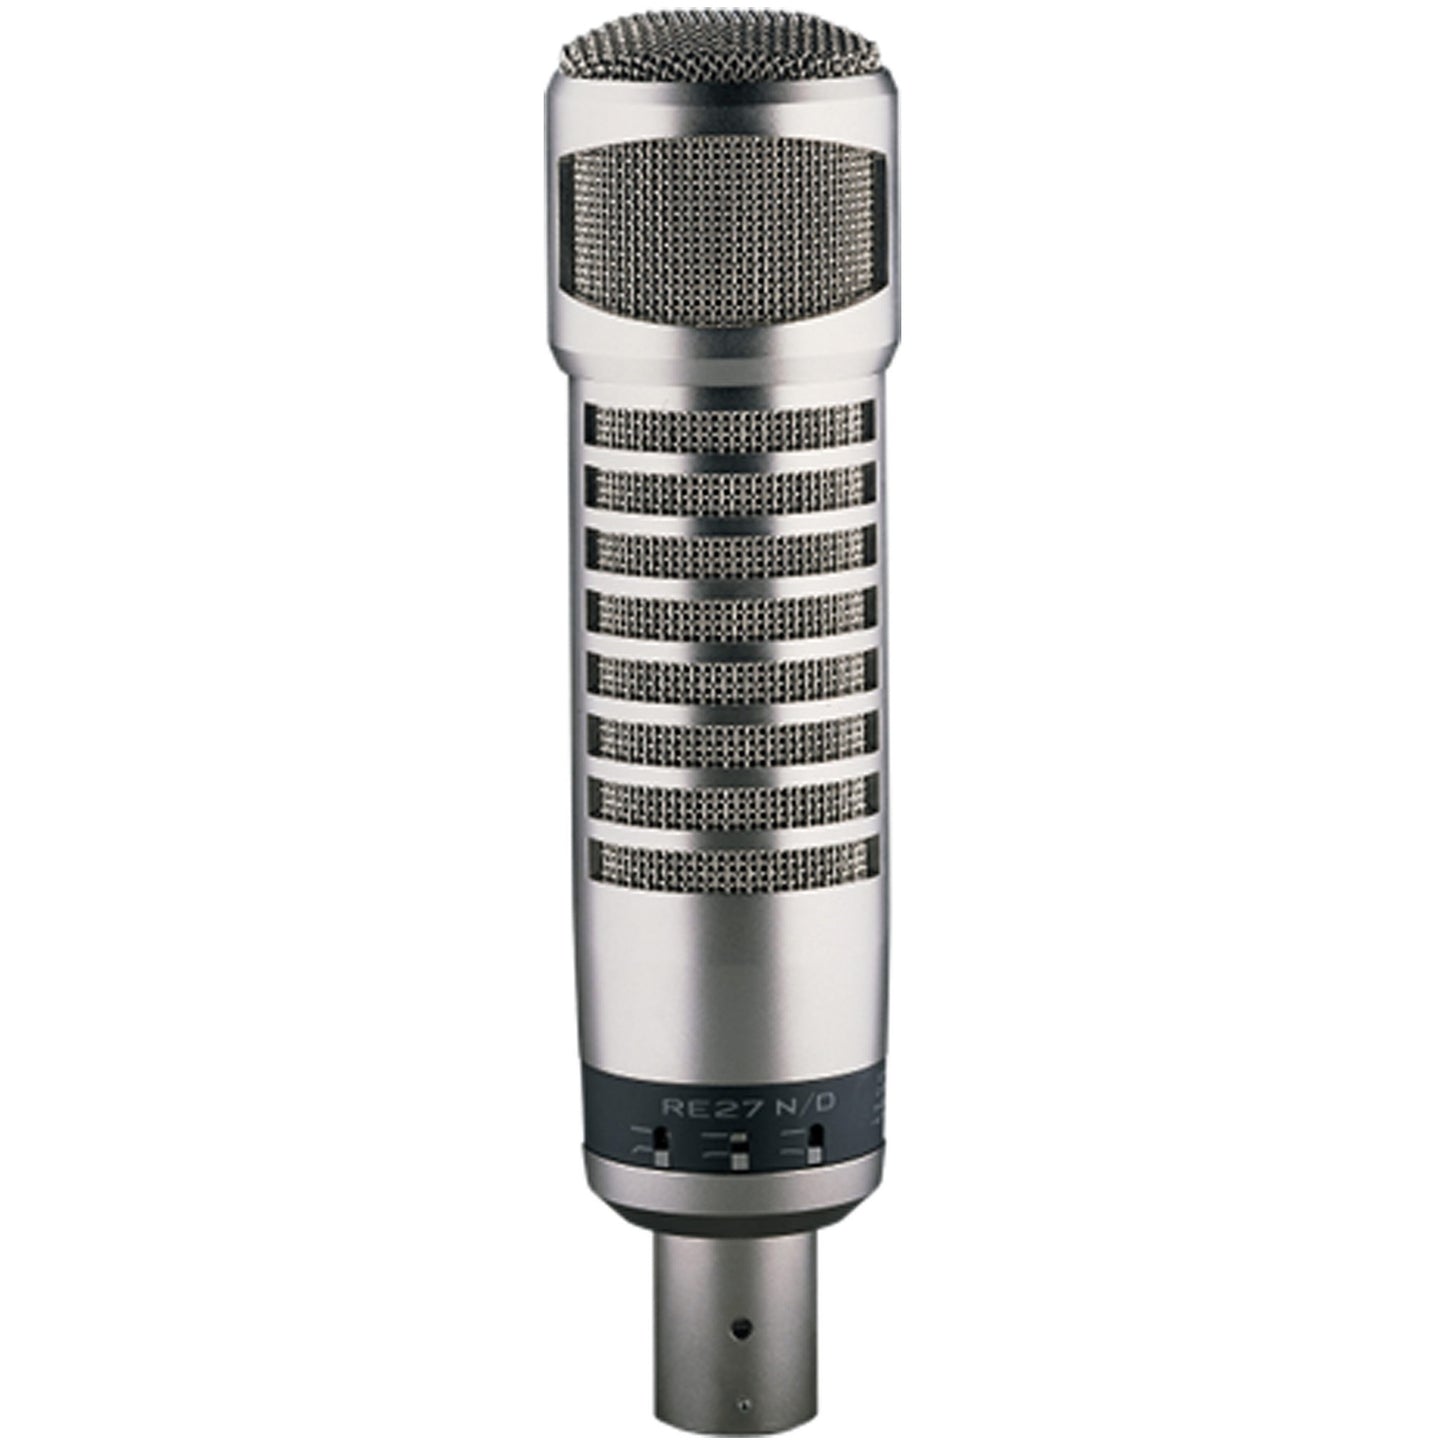 Electro-Voice RE27 N/D Dynamic Cardioid Microphone